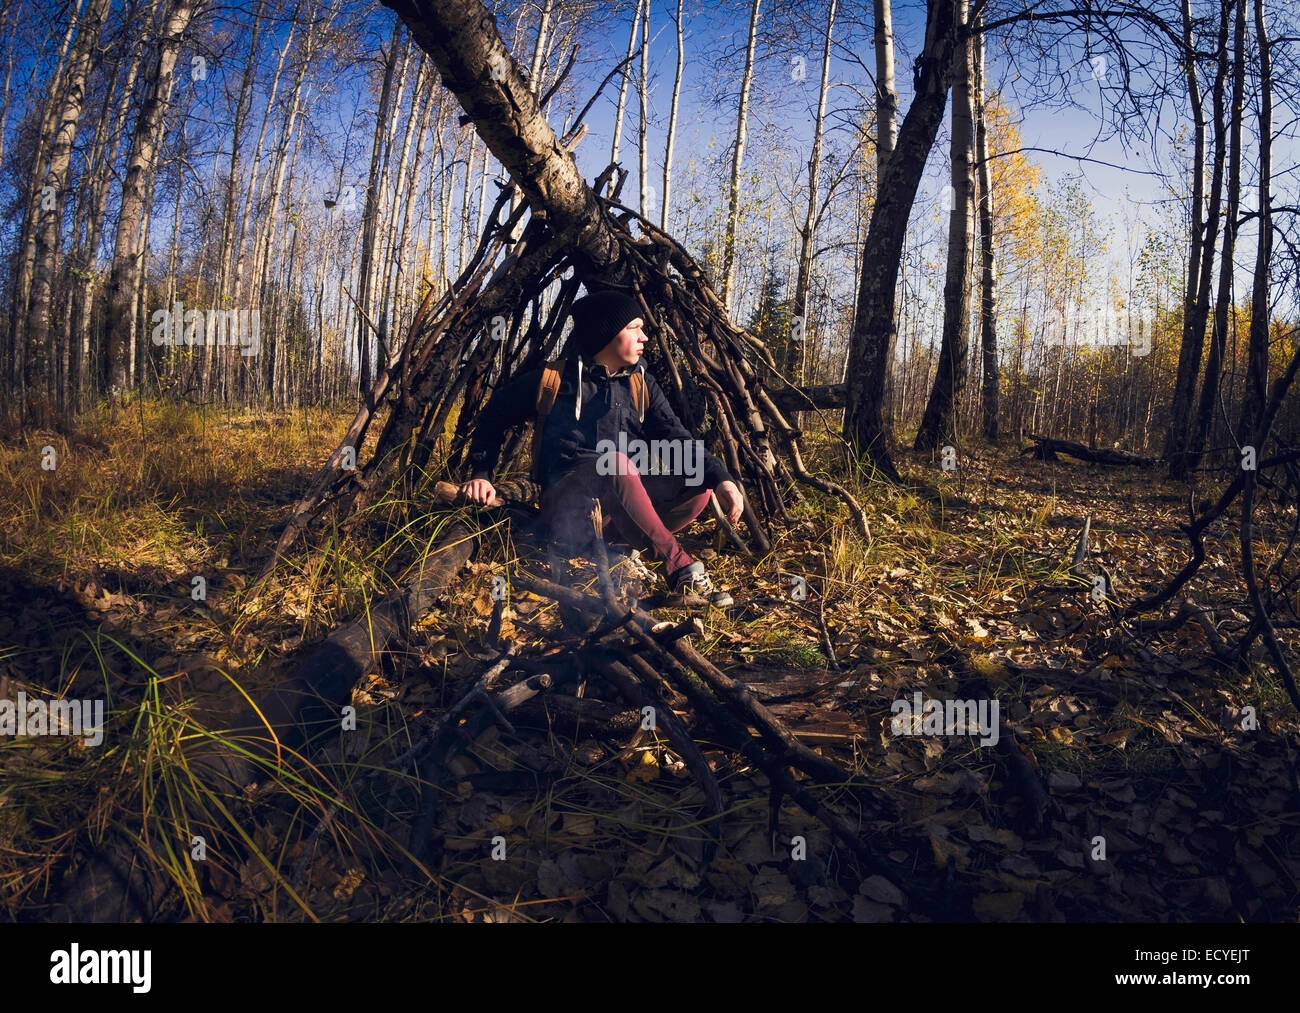 Man sitting in wooden shelter in forest Stock Photo